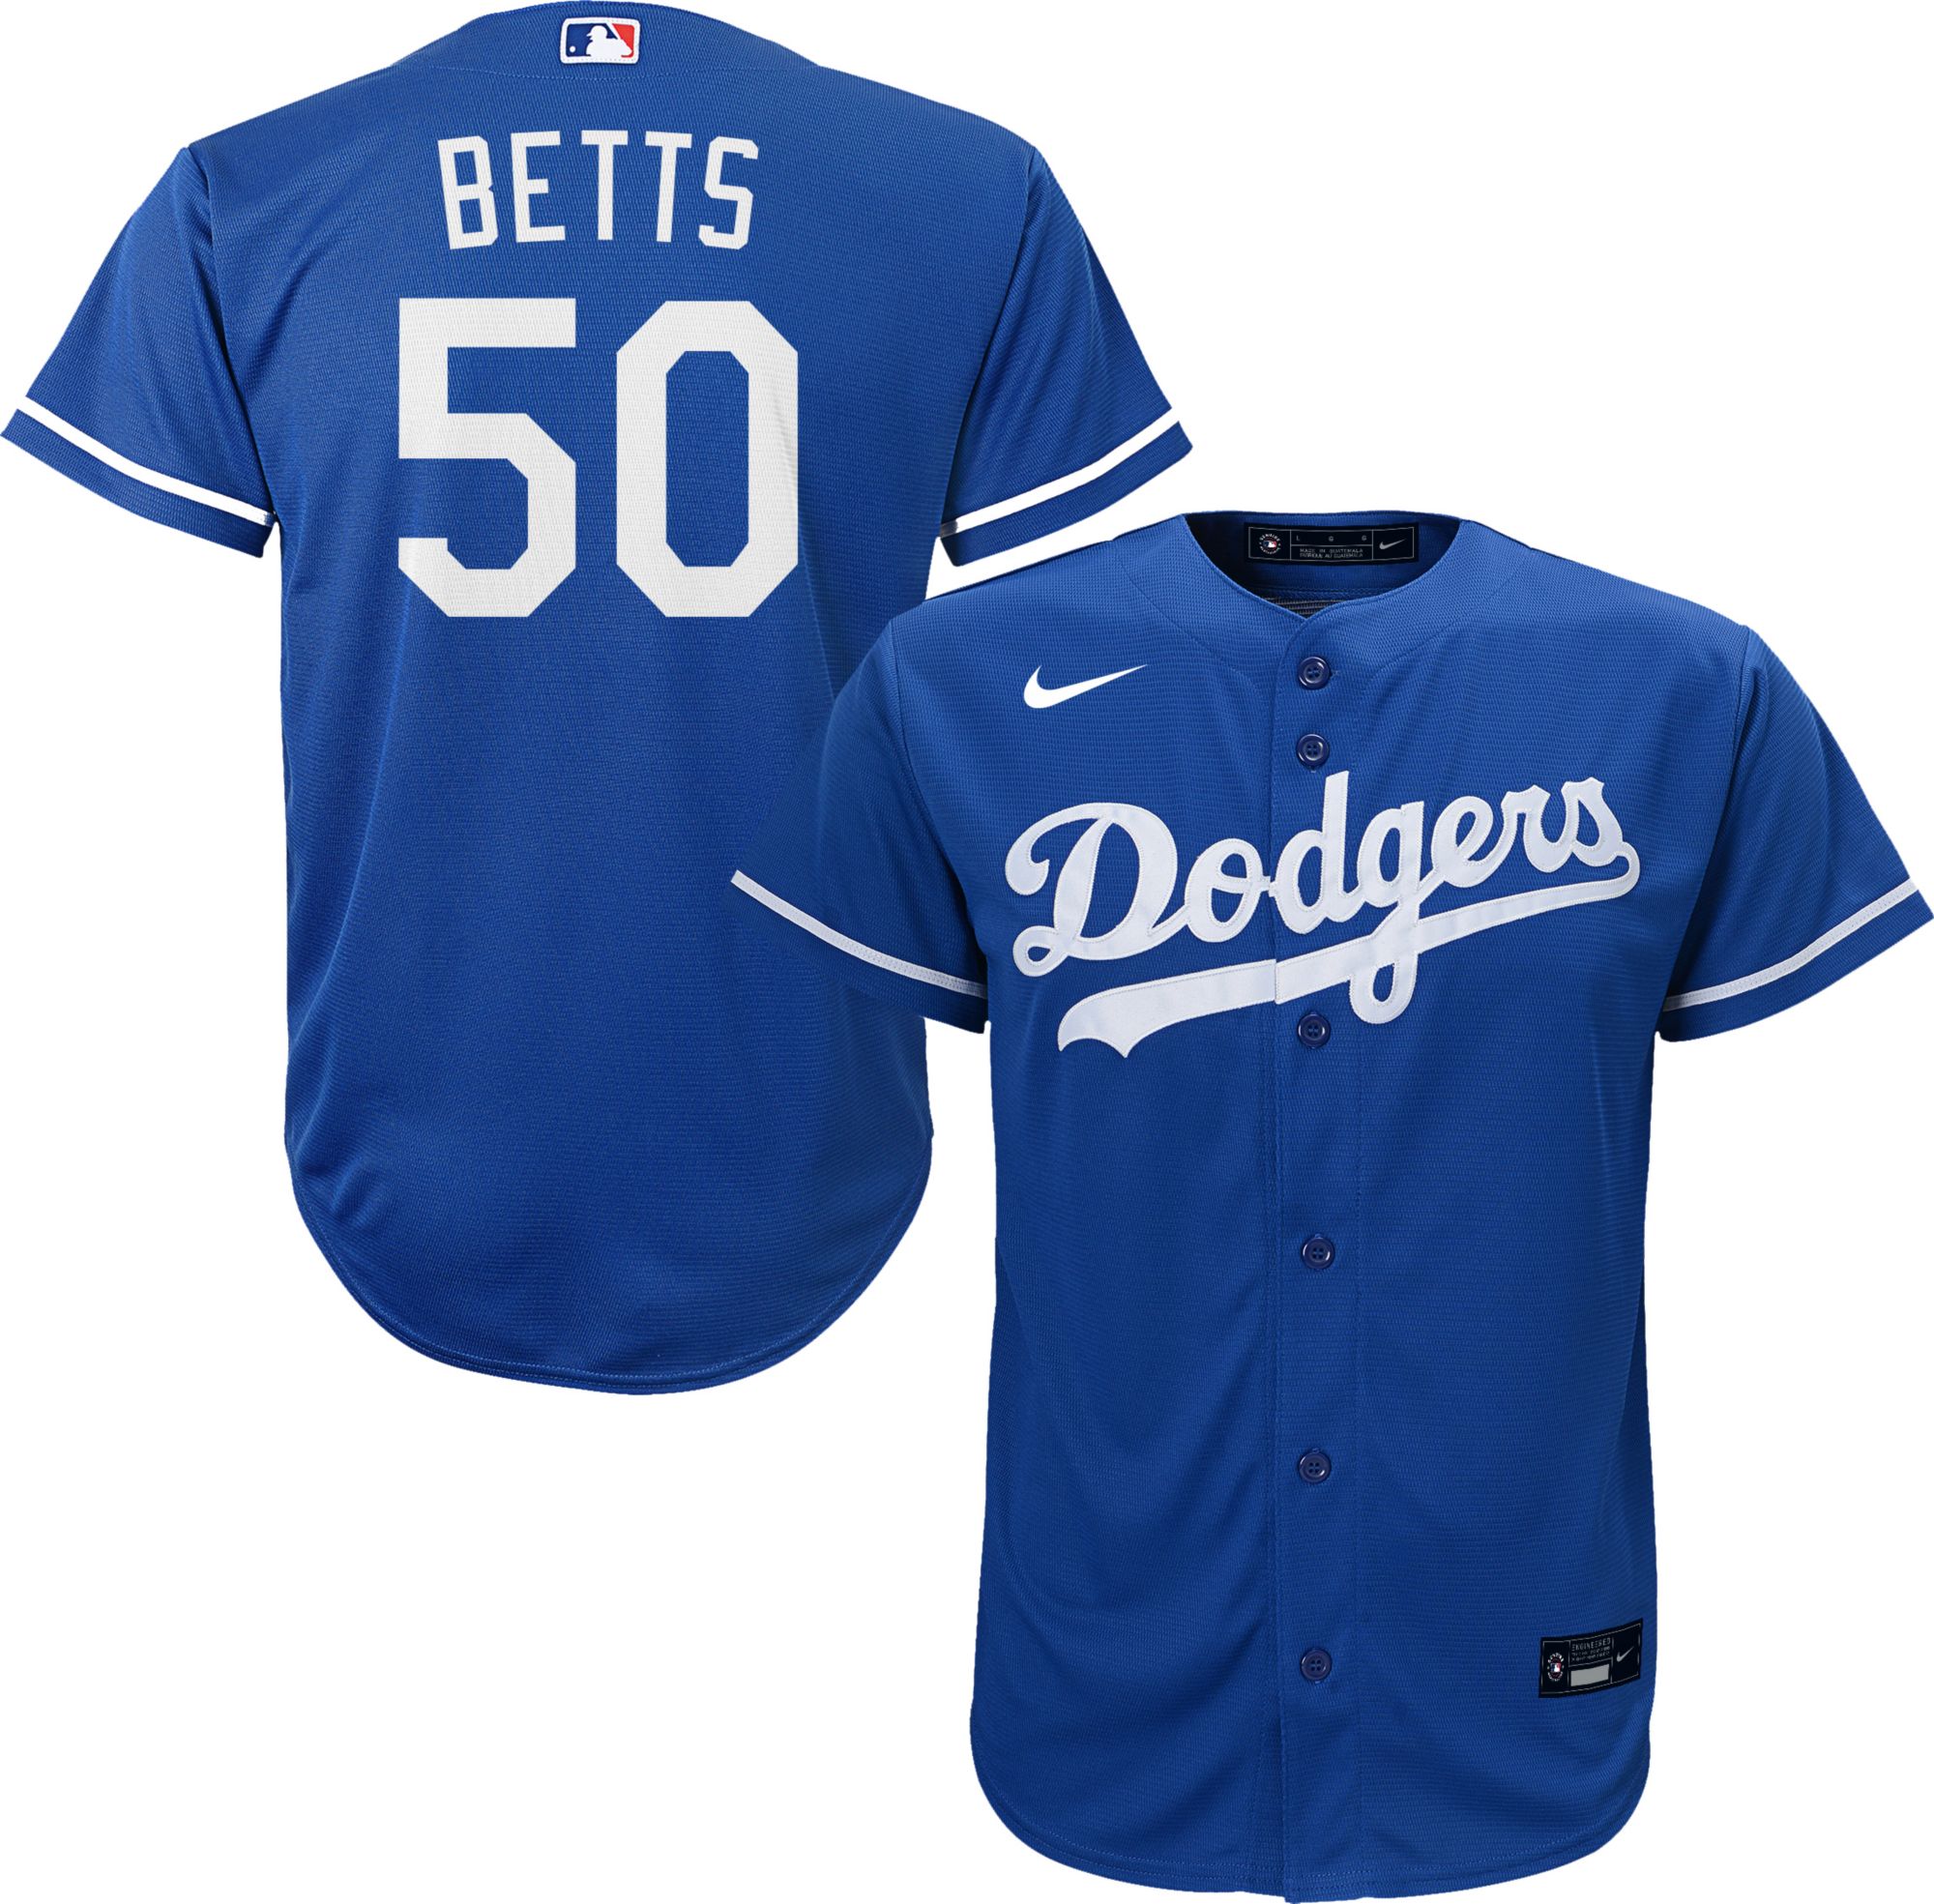 Outerstuff Mookie Betts Kids Replica Los Angeles Dodgers Jersey - White White / S